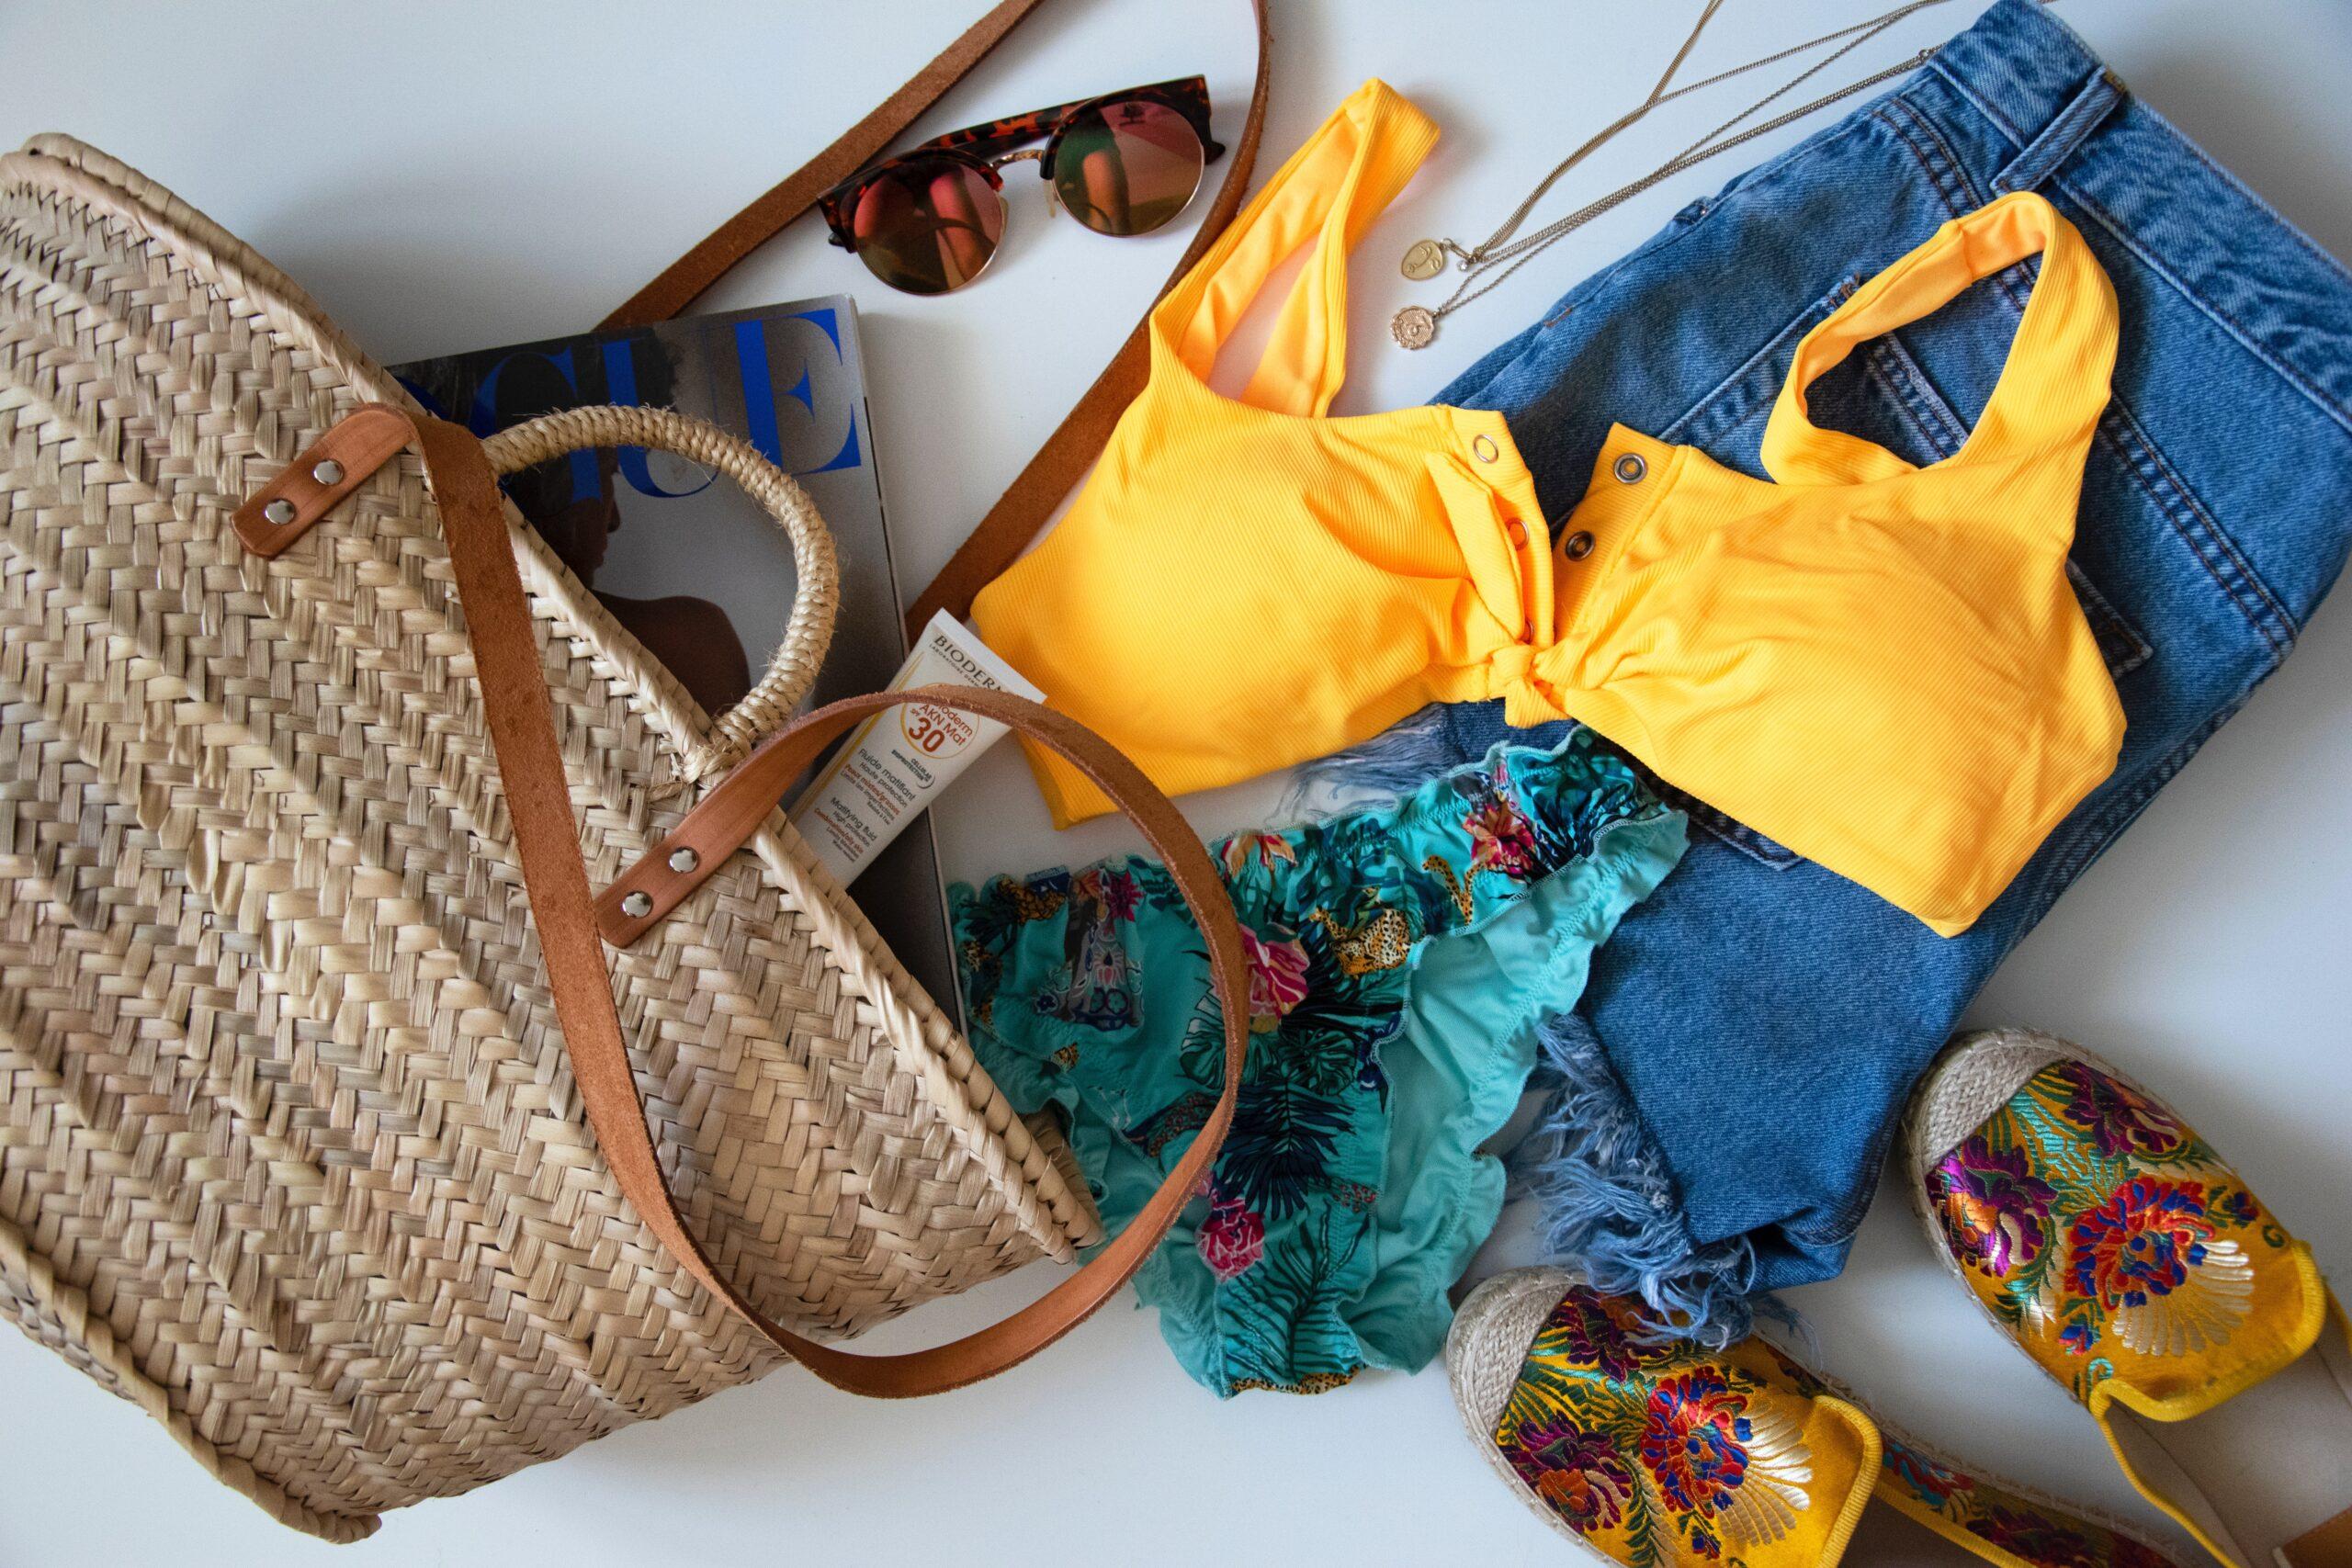 19 Beach Bag Essentials You Don't Want to Forget